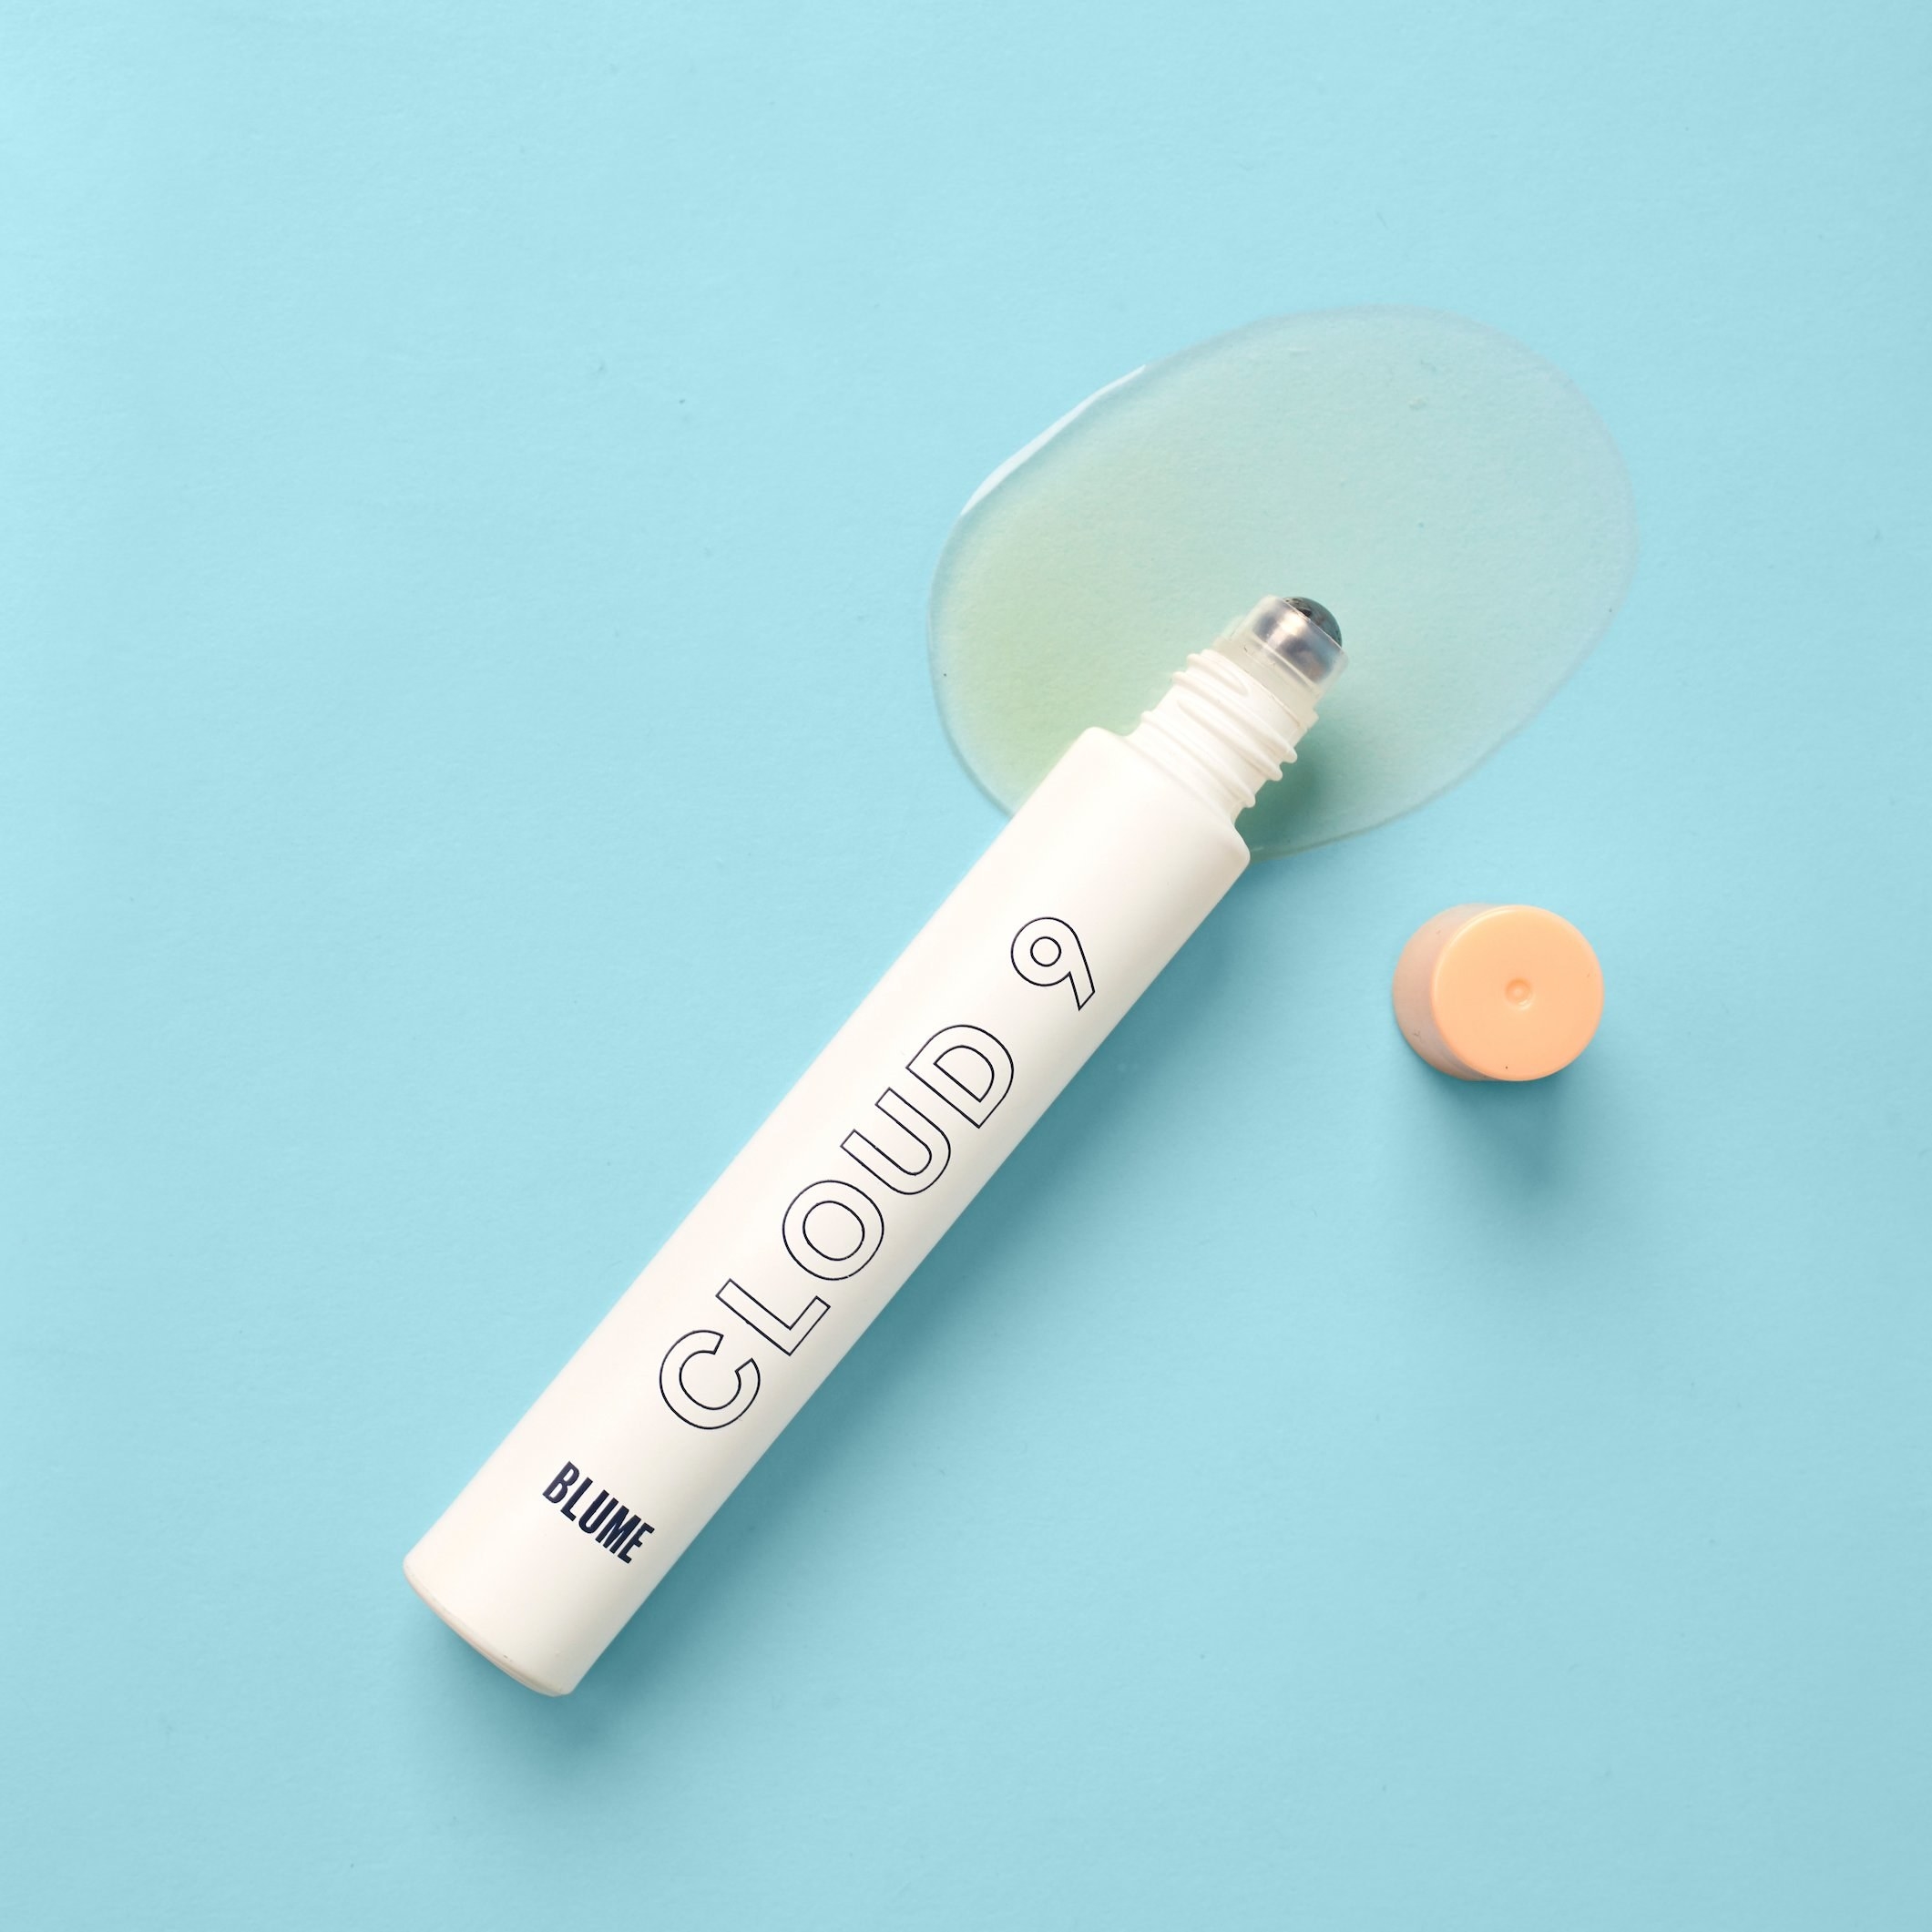 roll-on tube of blume cloud 9 essential oil with the cap off